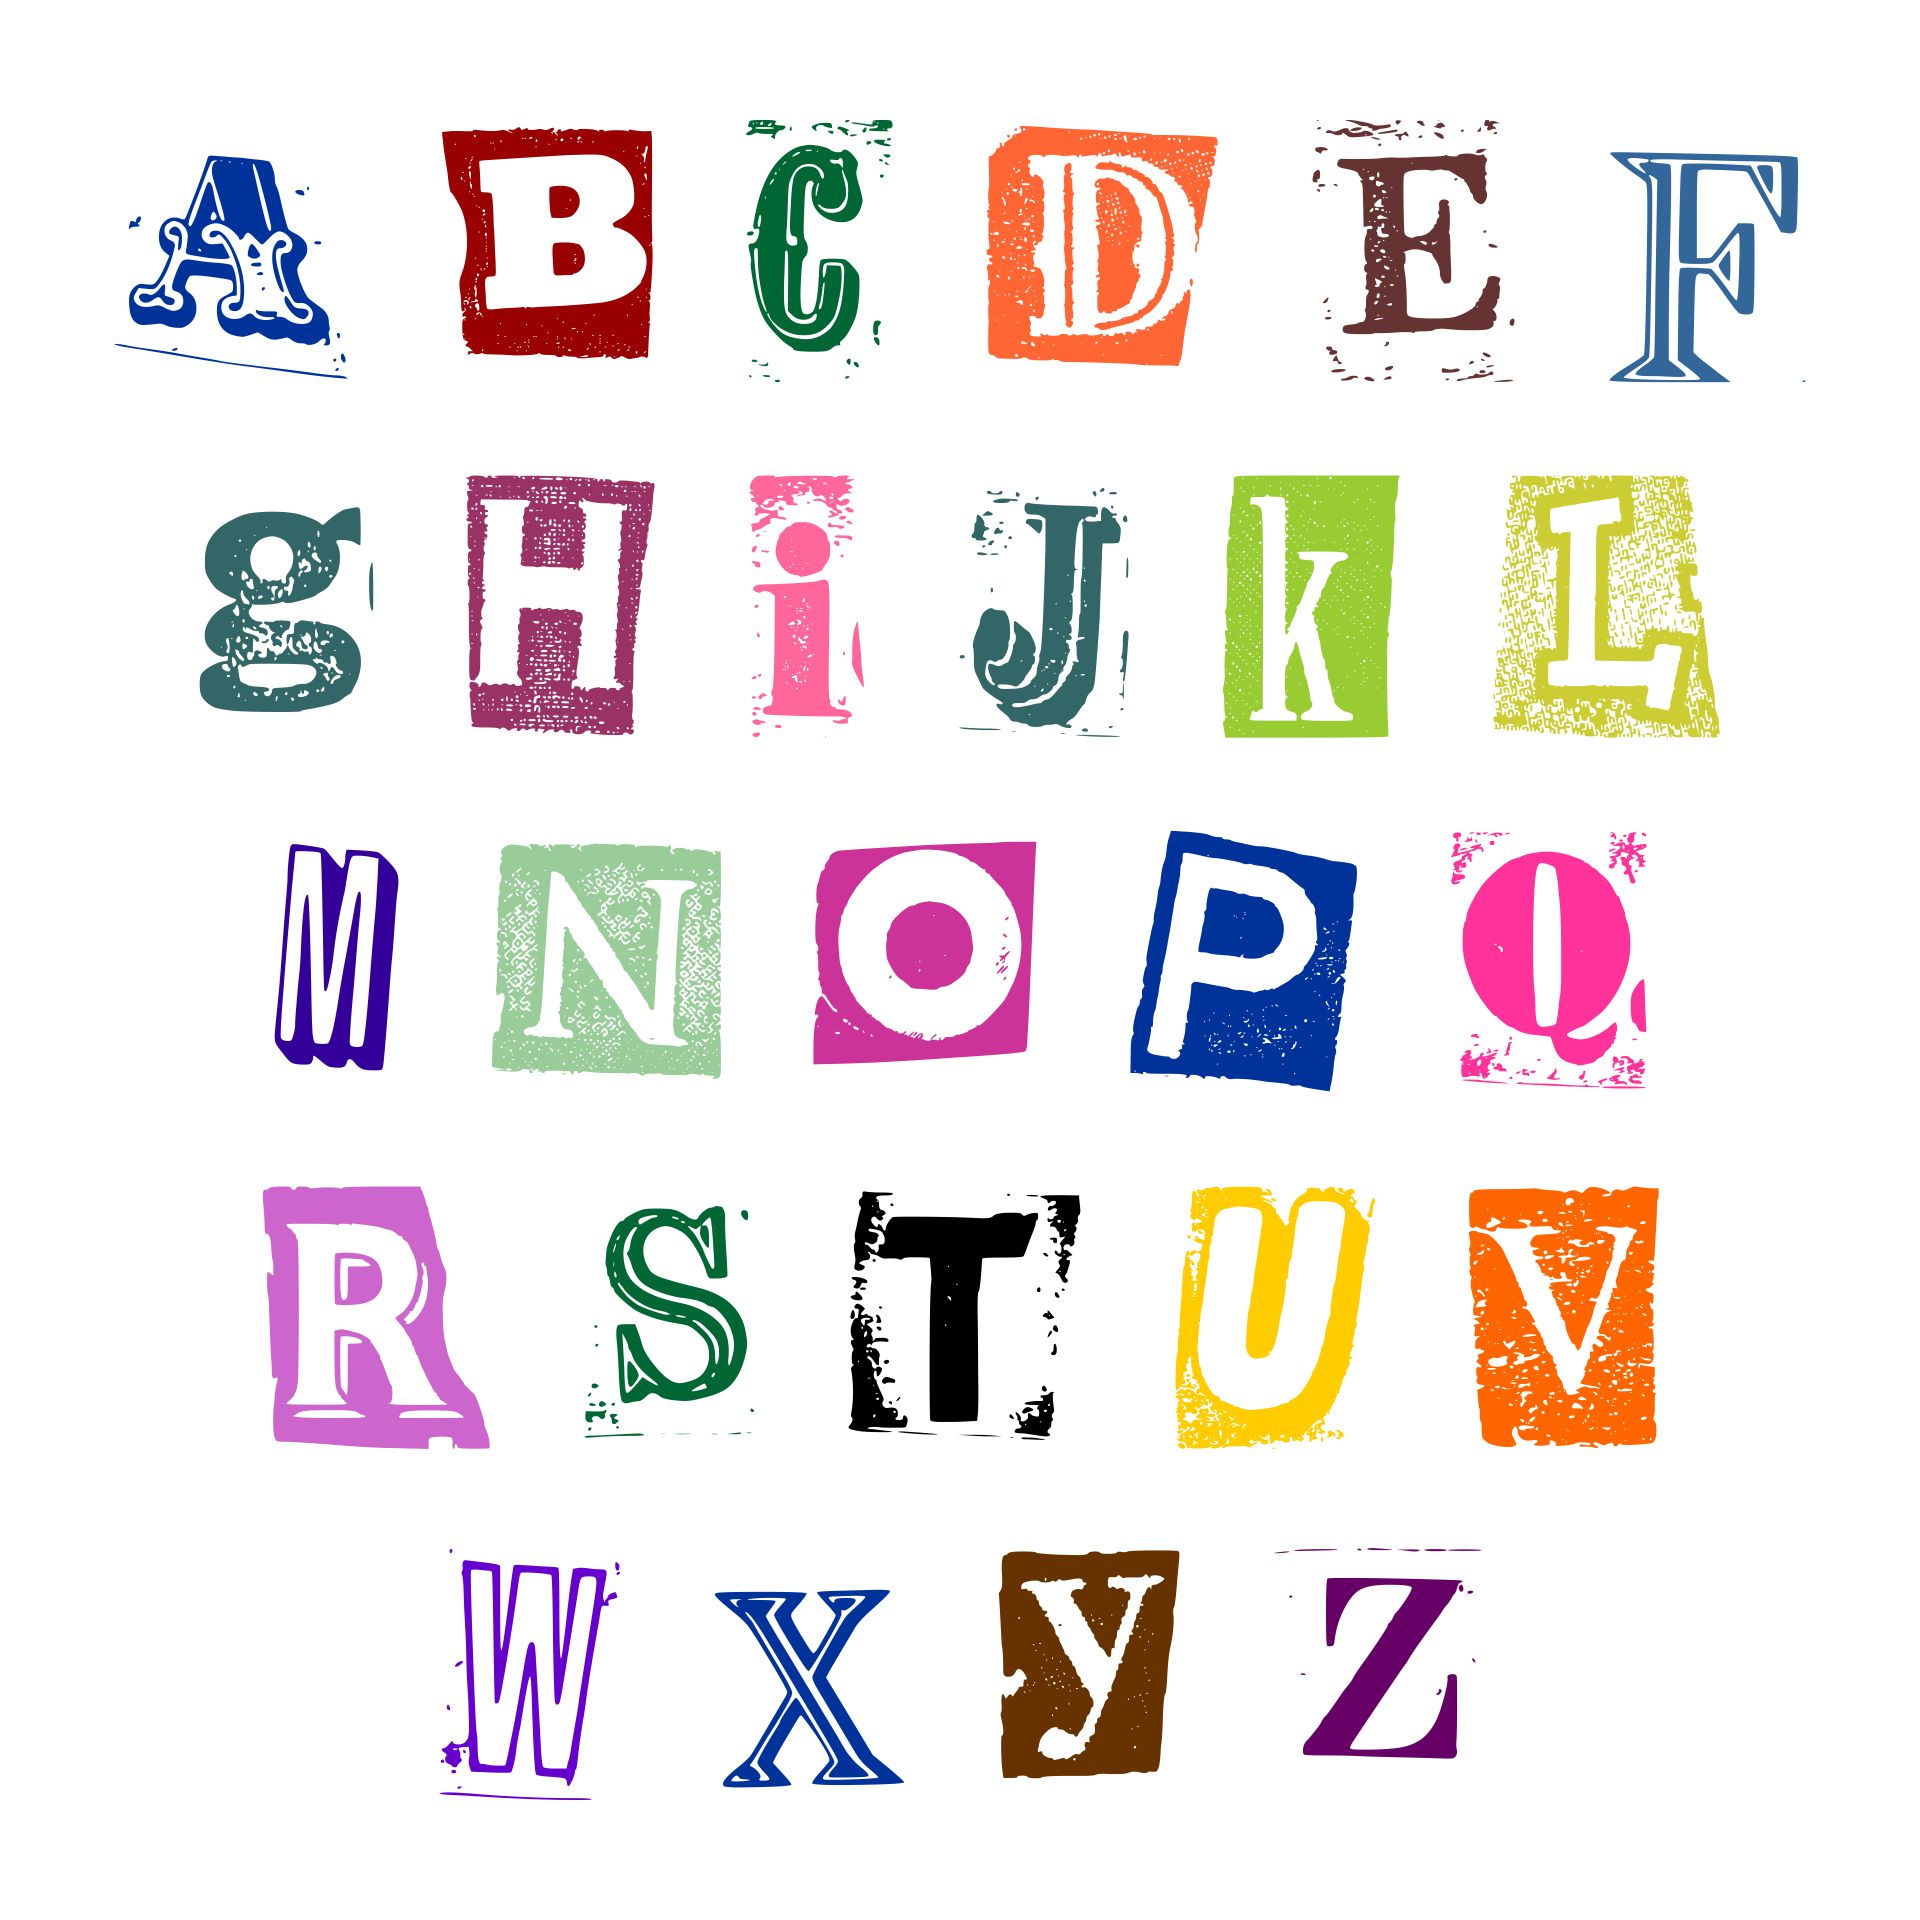 10 Best Printable Cut Out Letters